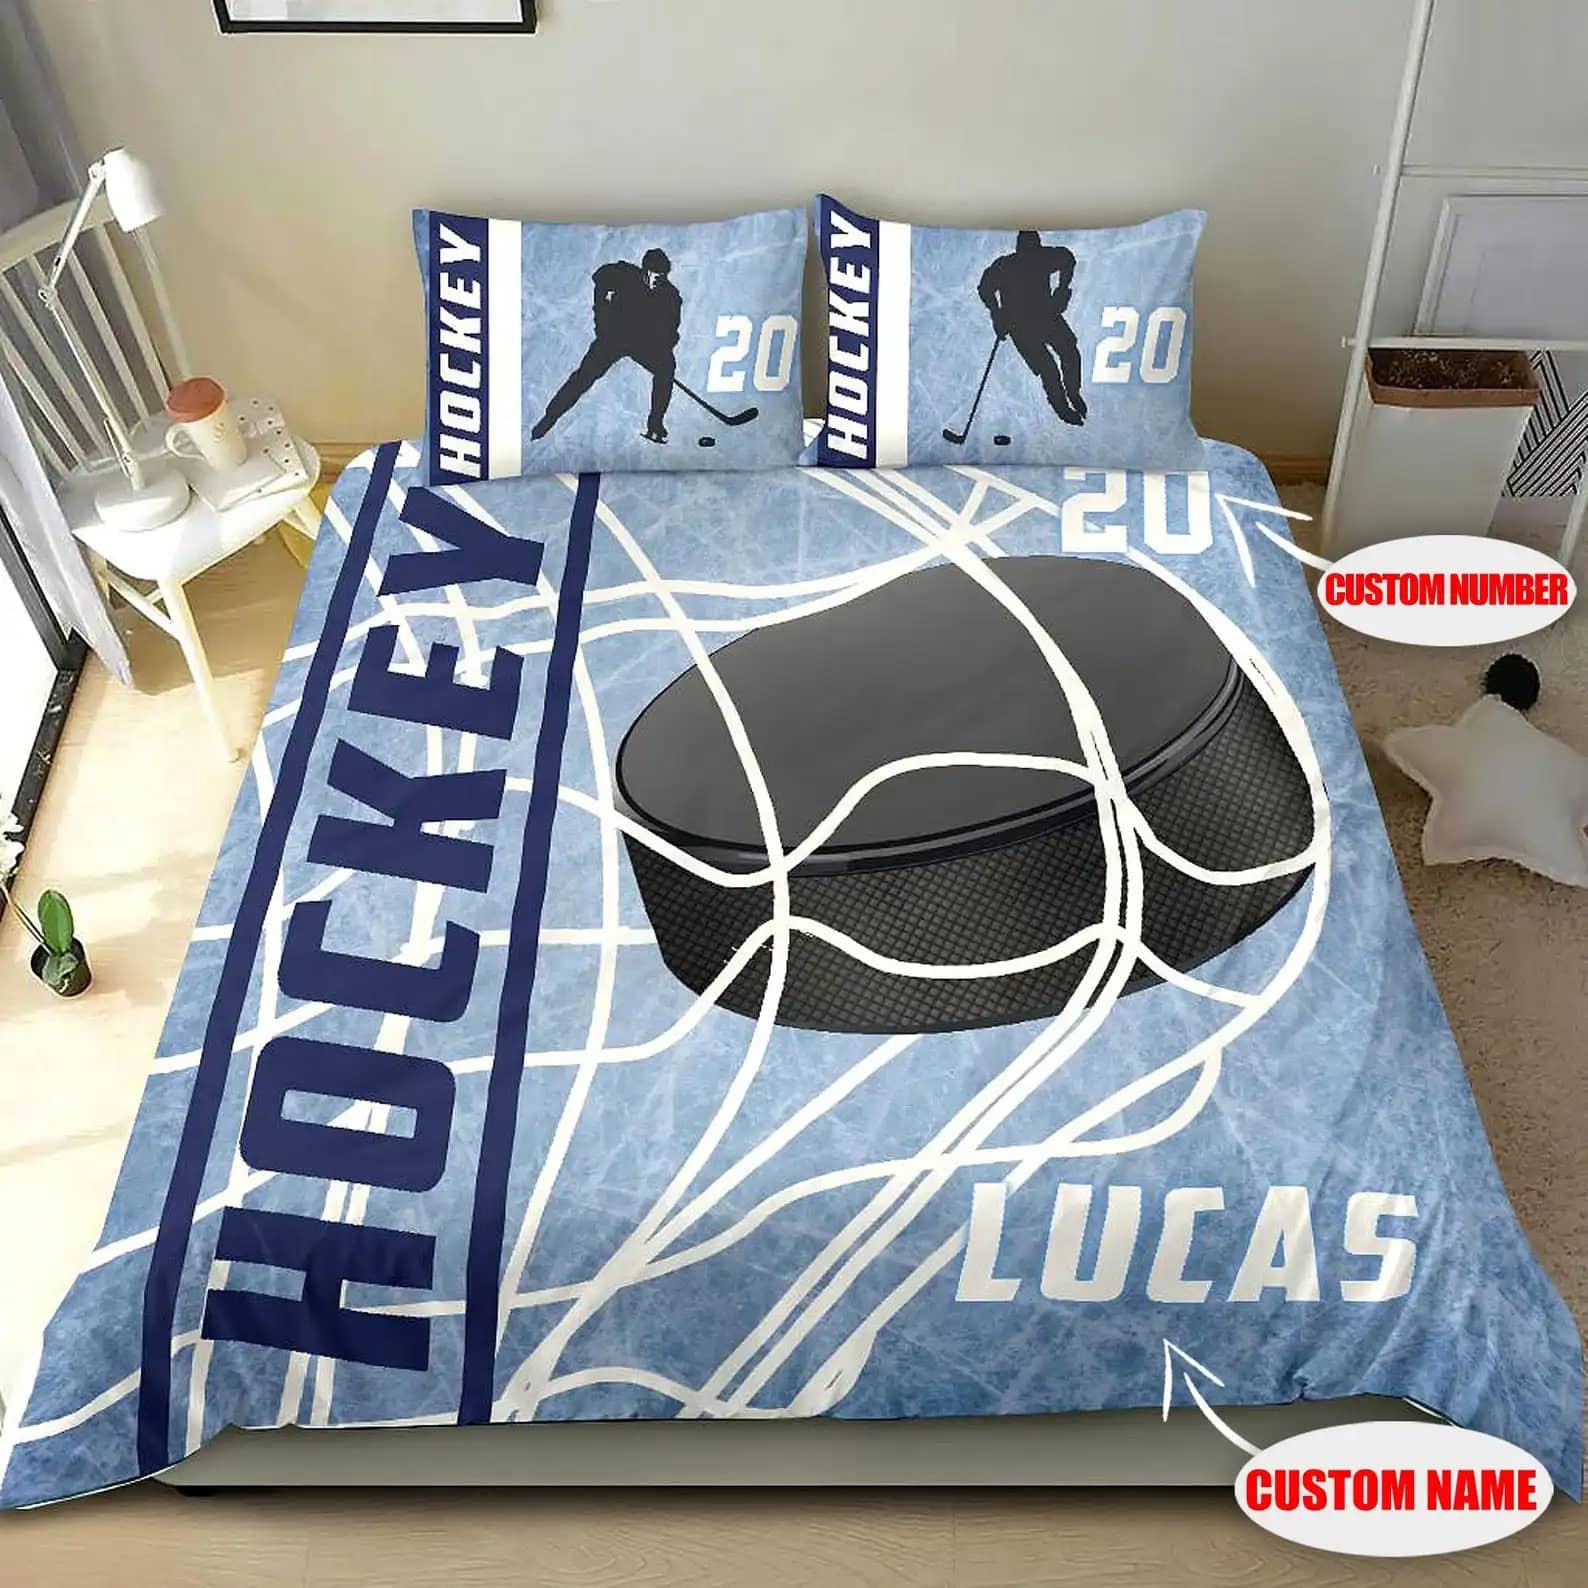 Custom Personalized Hockey Nhl Player Quilt Bedding Sets